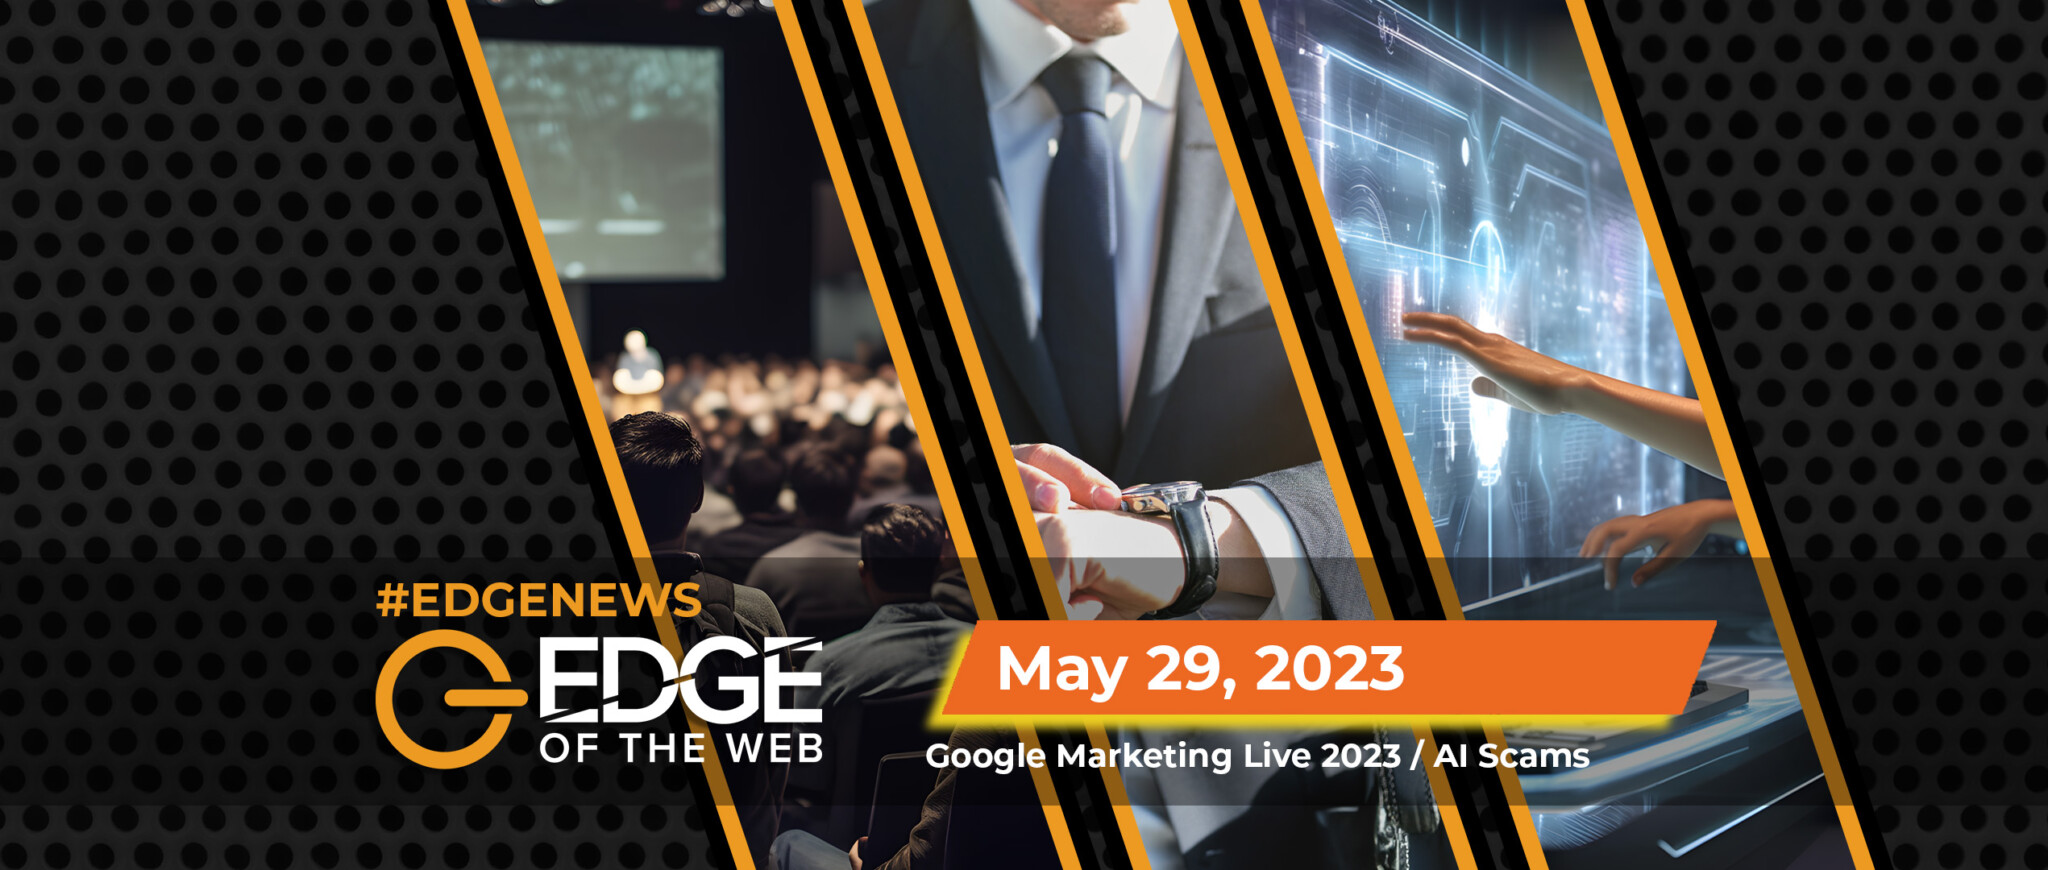 597 | News from the EDGE | Week of 5.29.2023